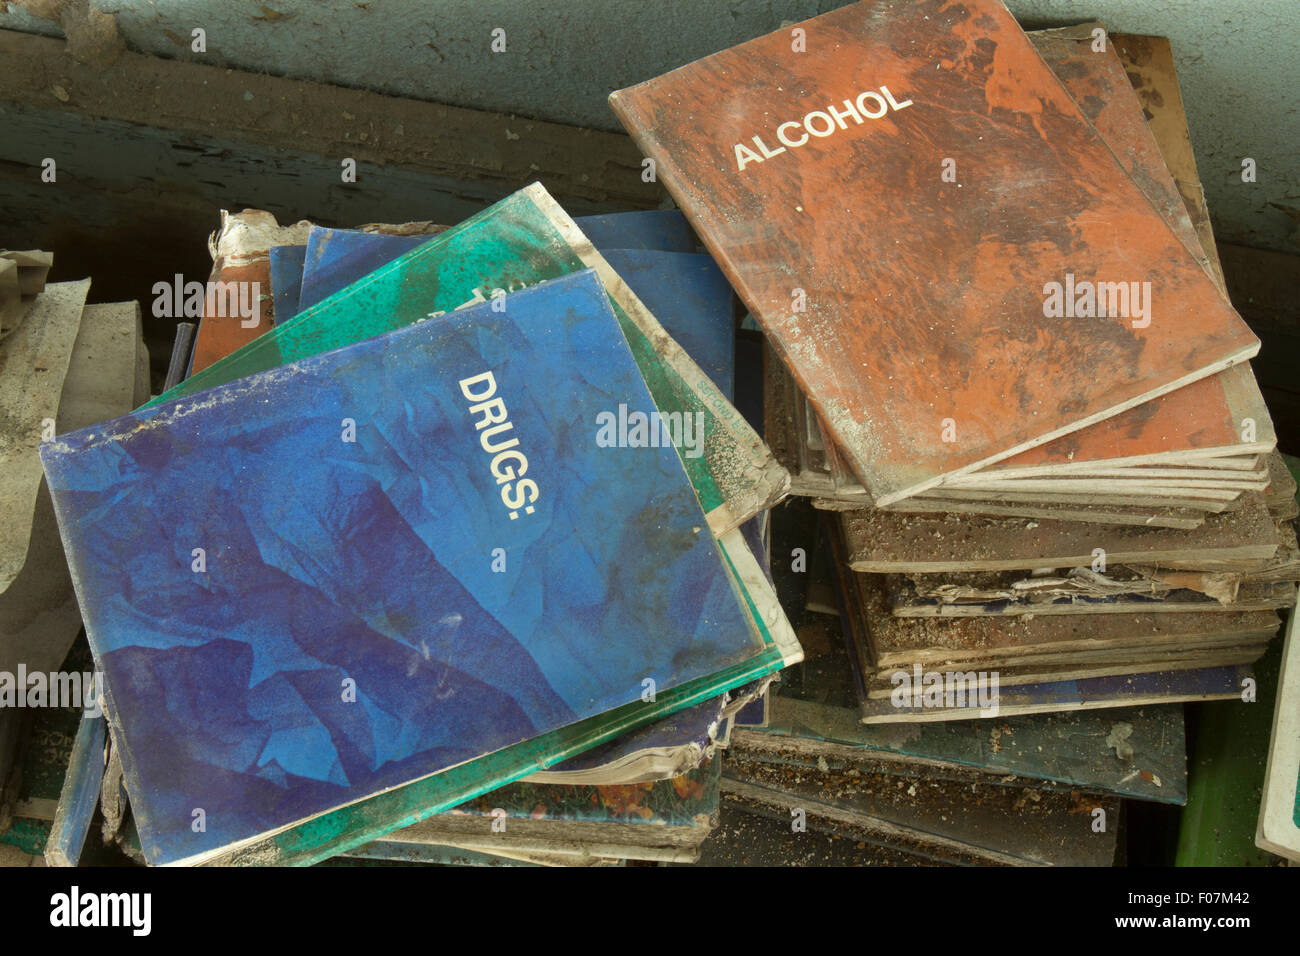 Rotting primers on drugs and alcohol on top of old school books. Stock Photo